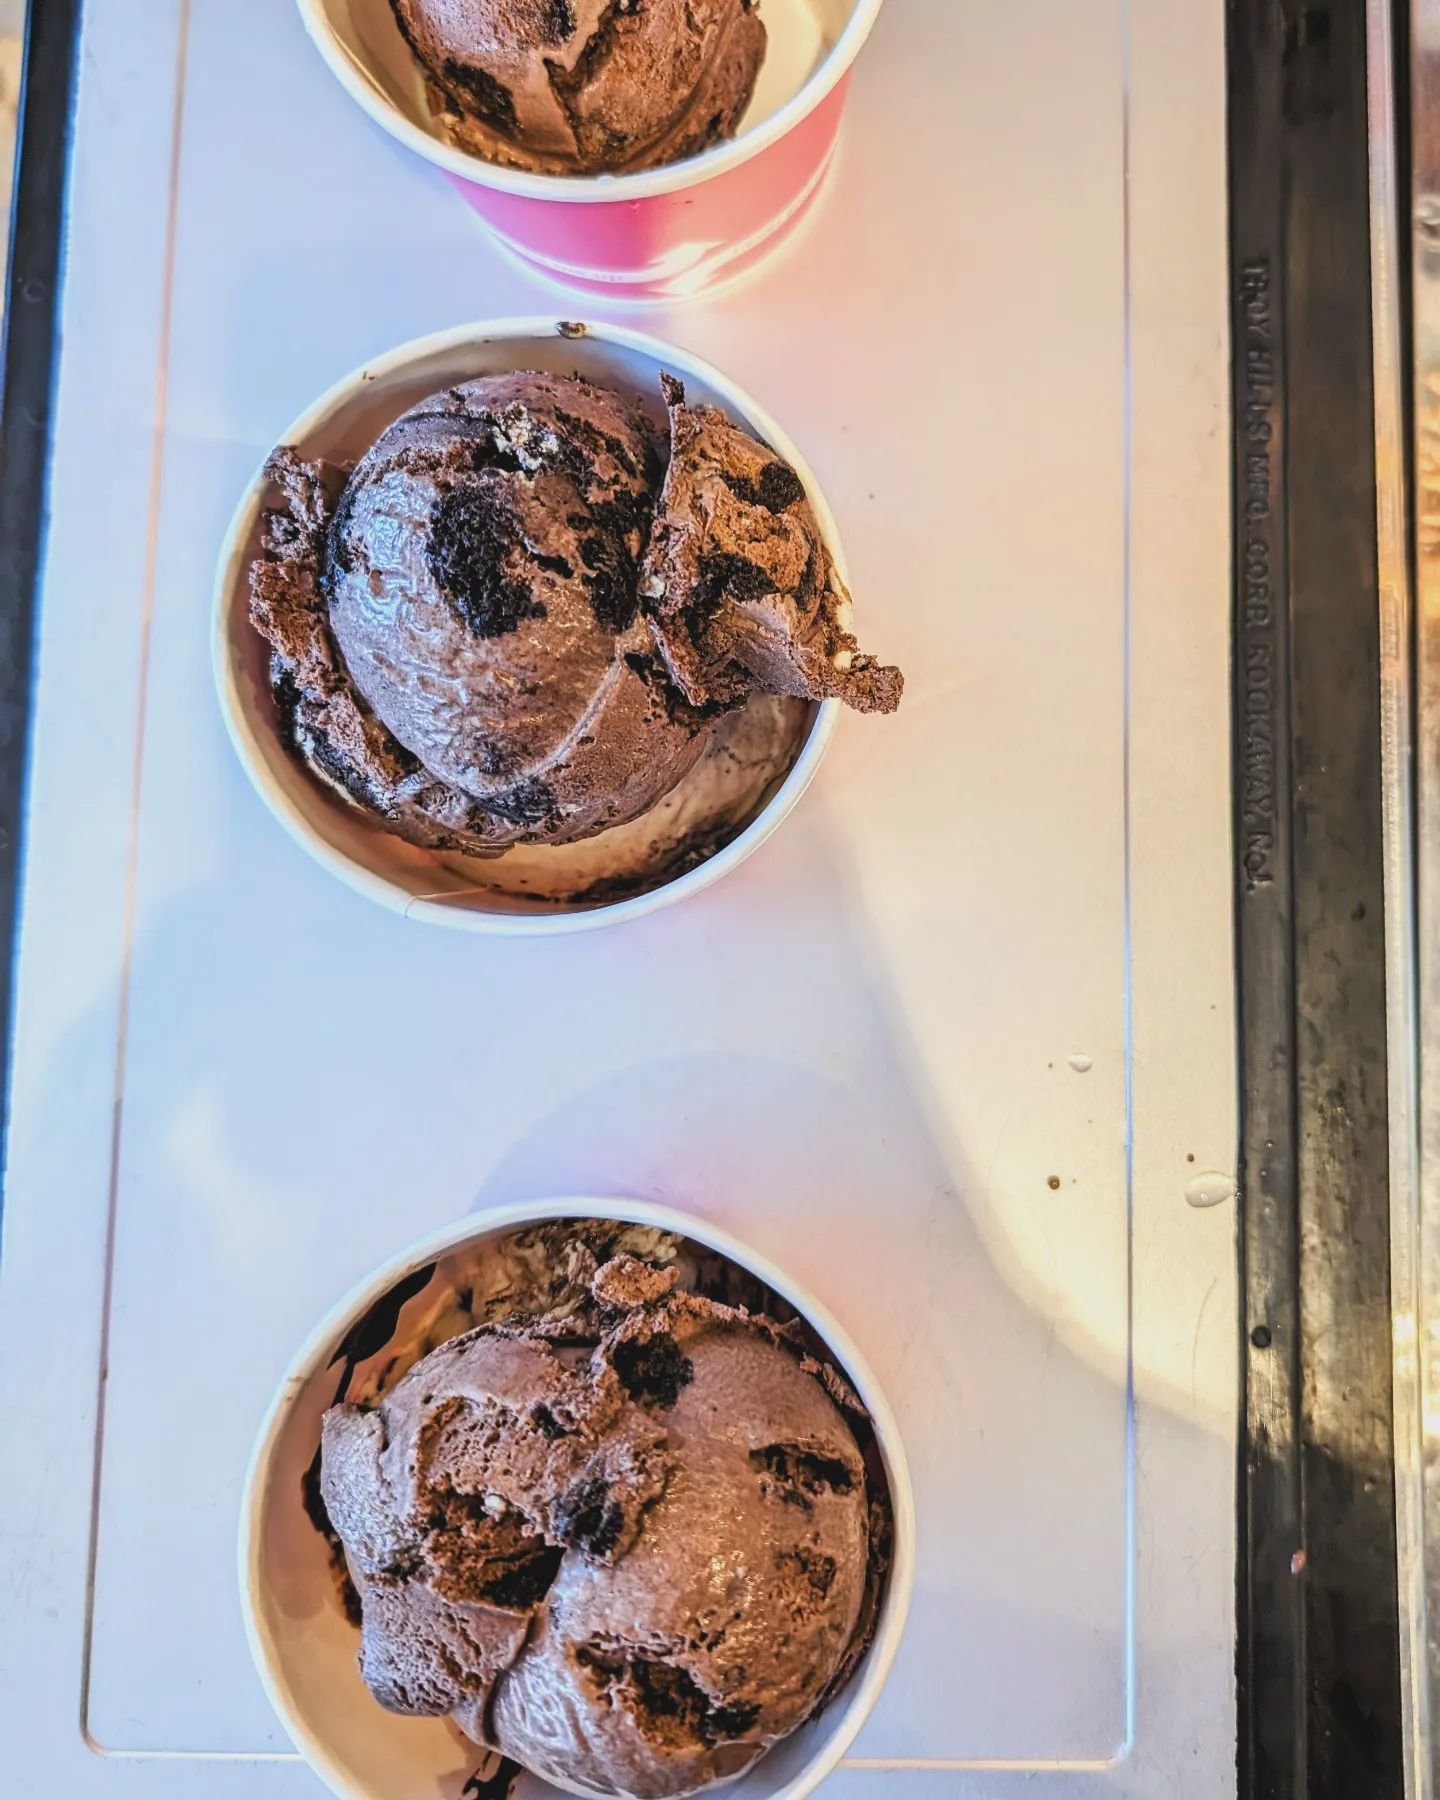 If you missed the memo:
Dark Side of the Moon = Dark Chocolate Oreo
&bull; our darkest chocolate ice cream + Oreo chunks&bull;

That makes 3️⃣ options with Oreos right now. If you had to pick a 4th, what would it be?! 
My vote would be sprinkle cake 